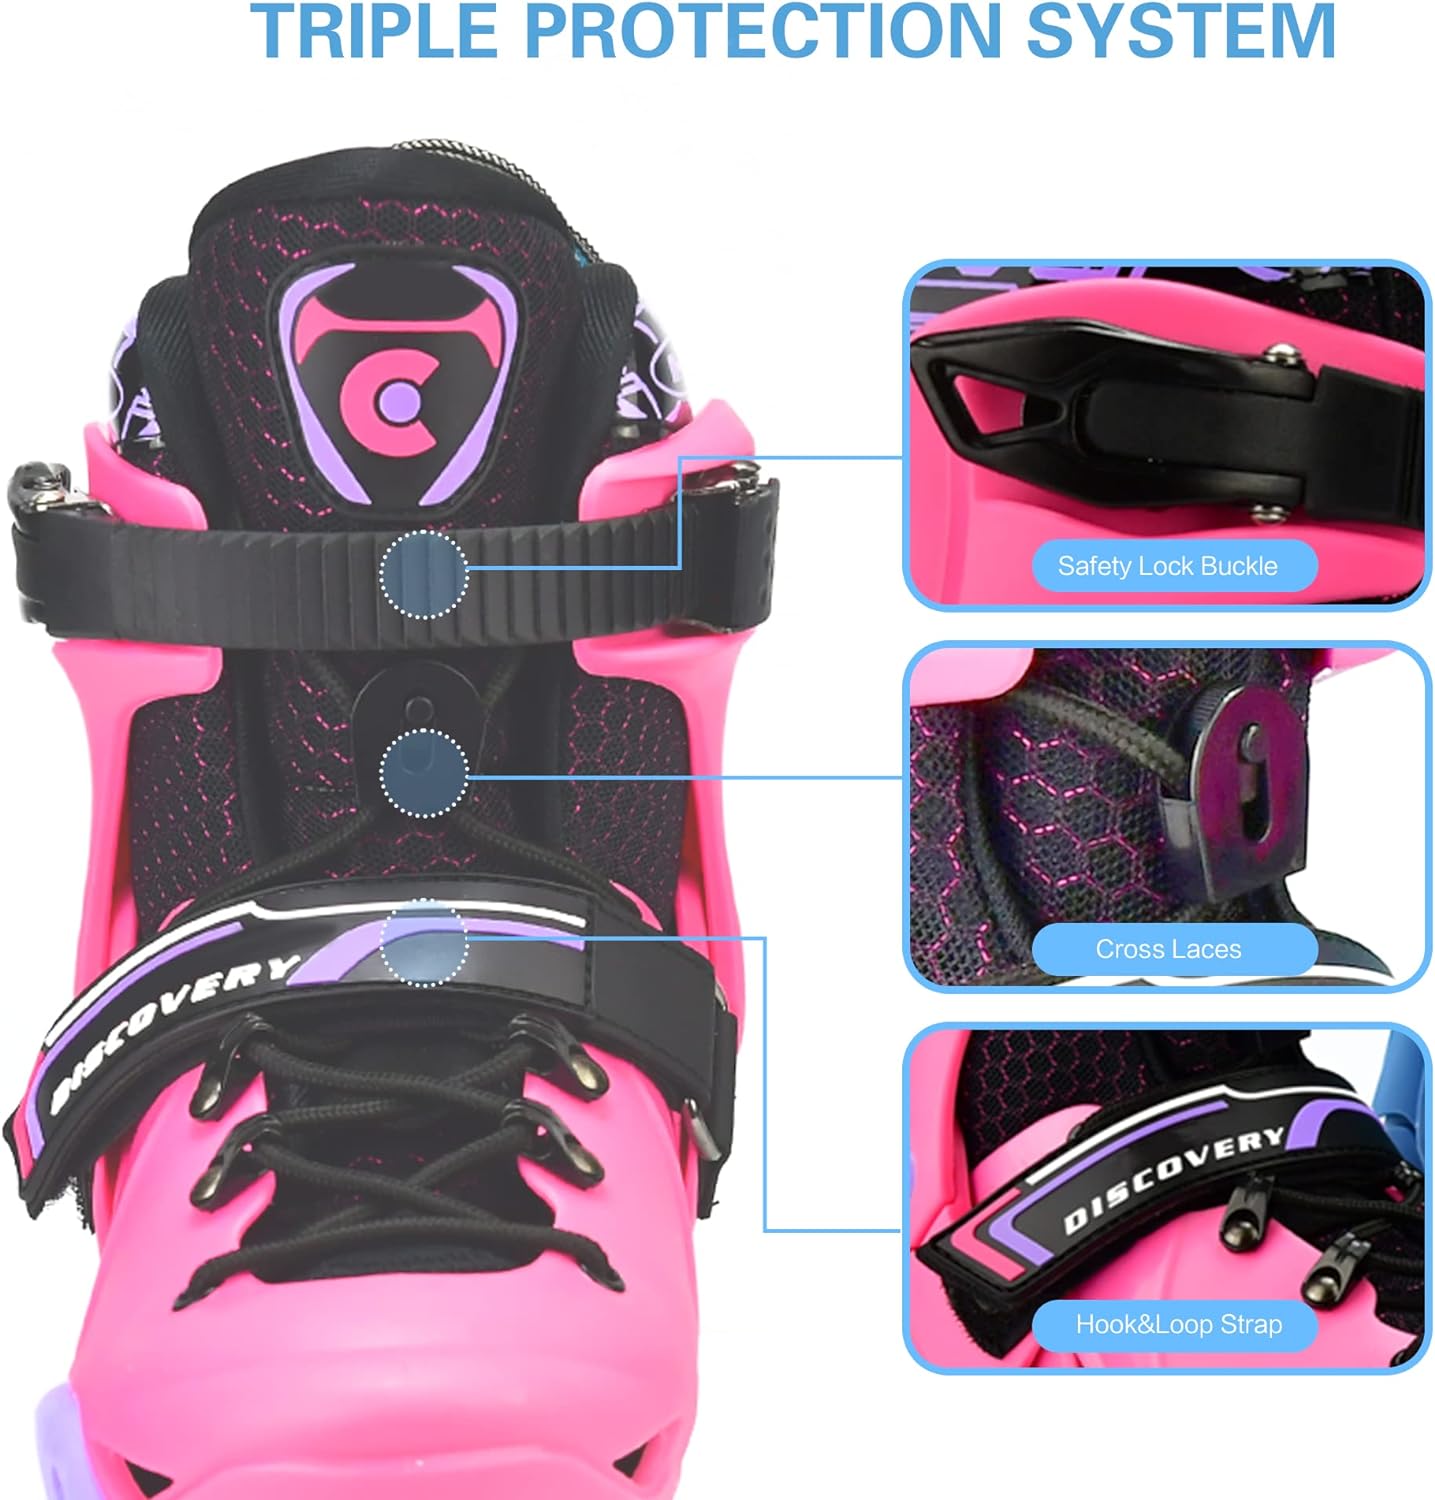 Micro Skates Discovery - Pink with Brake Set (Size 33-36) - Laadlee